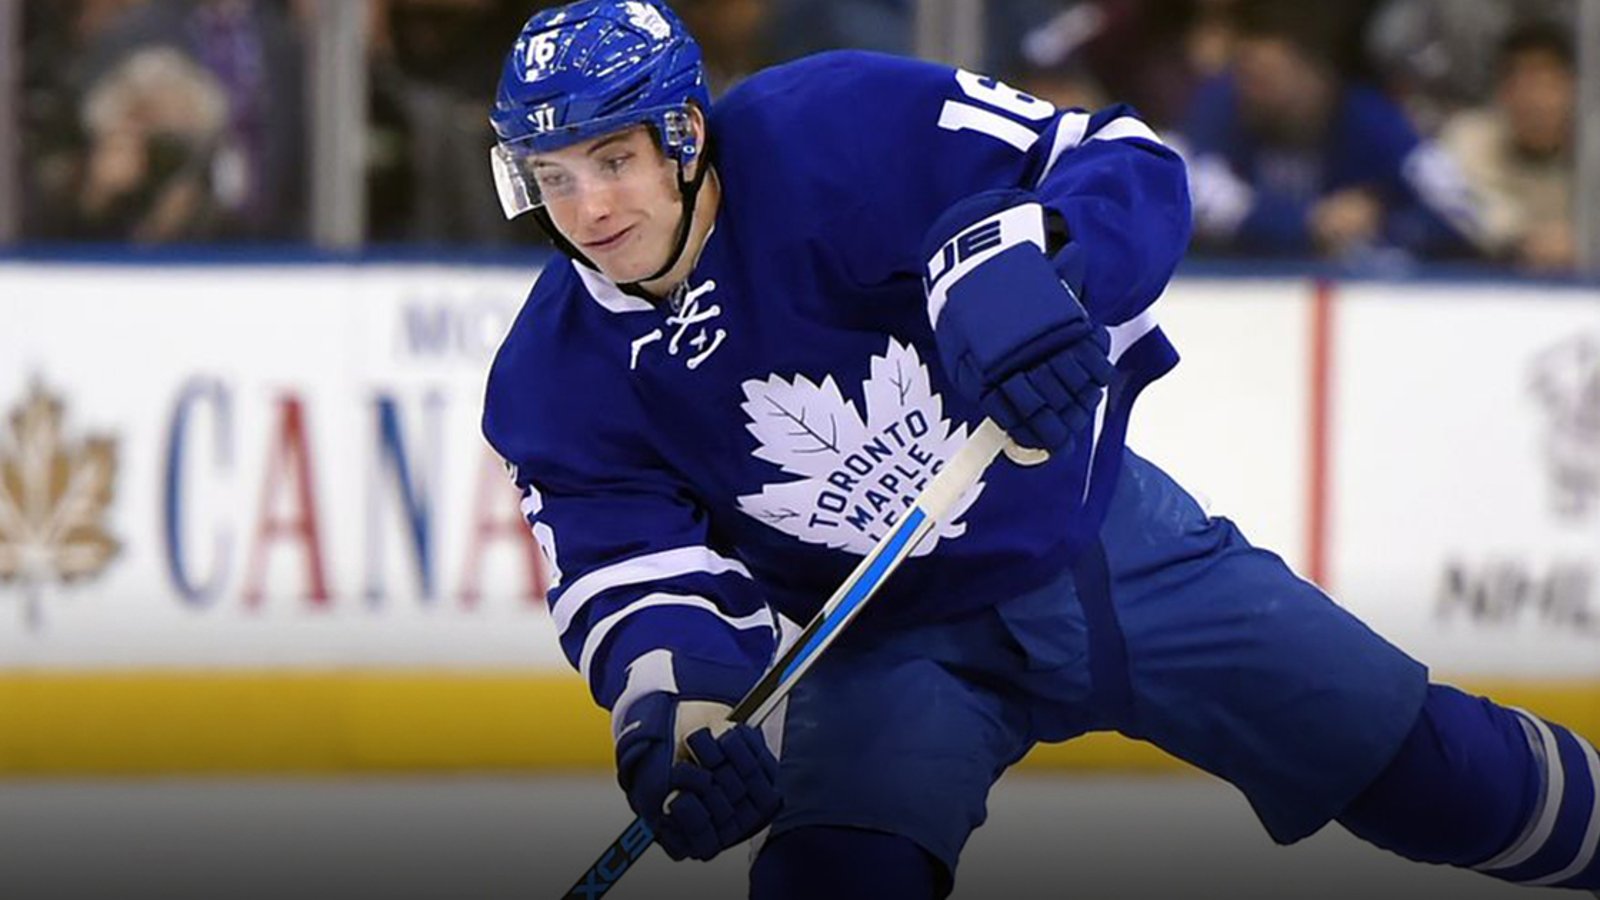 Report: Marner falls into the same old trap